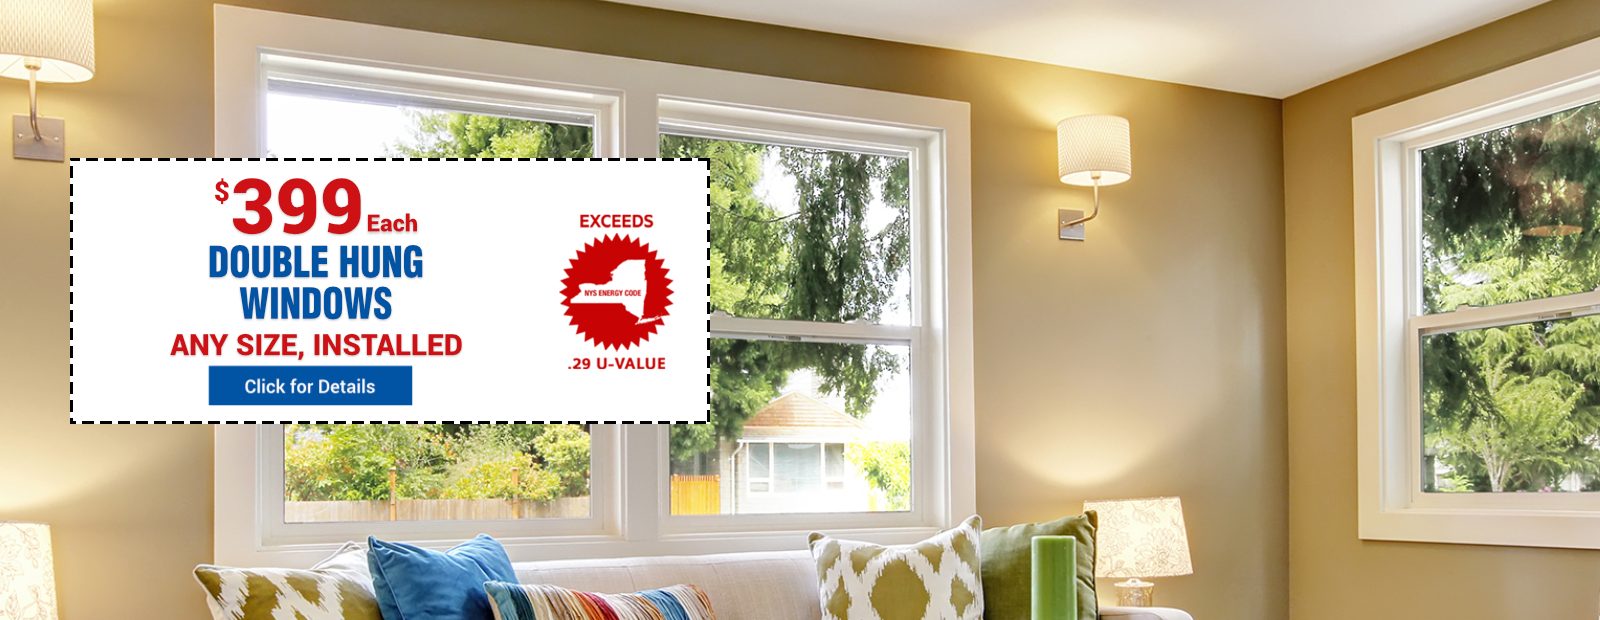 3000 Series Double Hung Windows - Offer Price